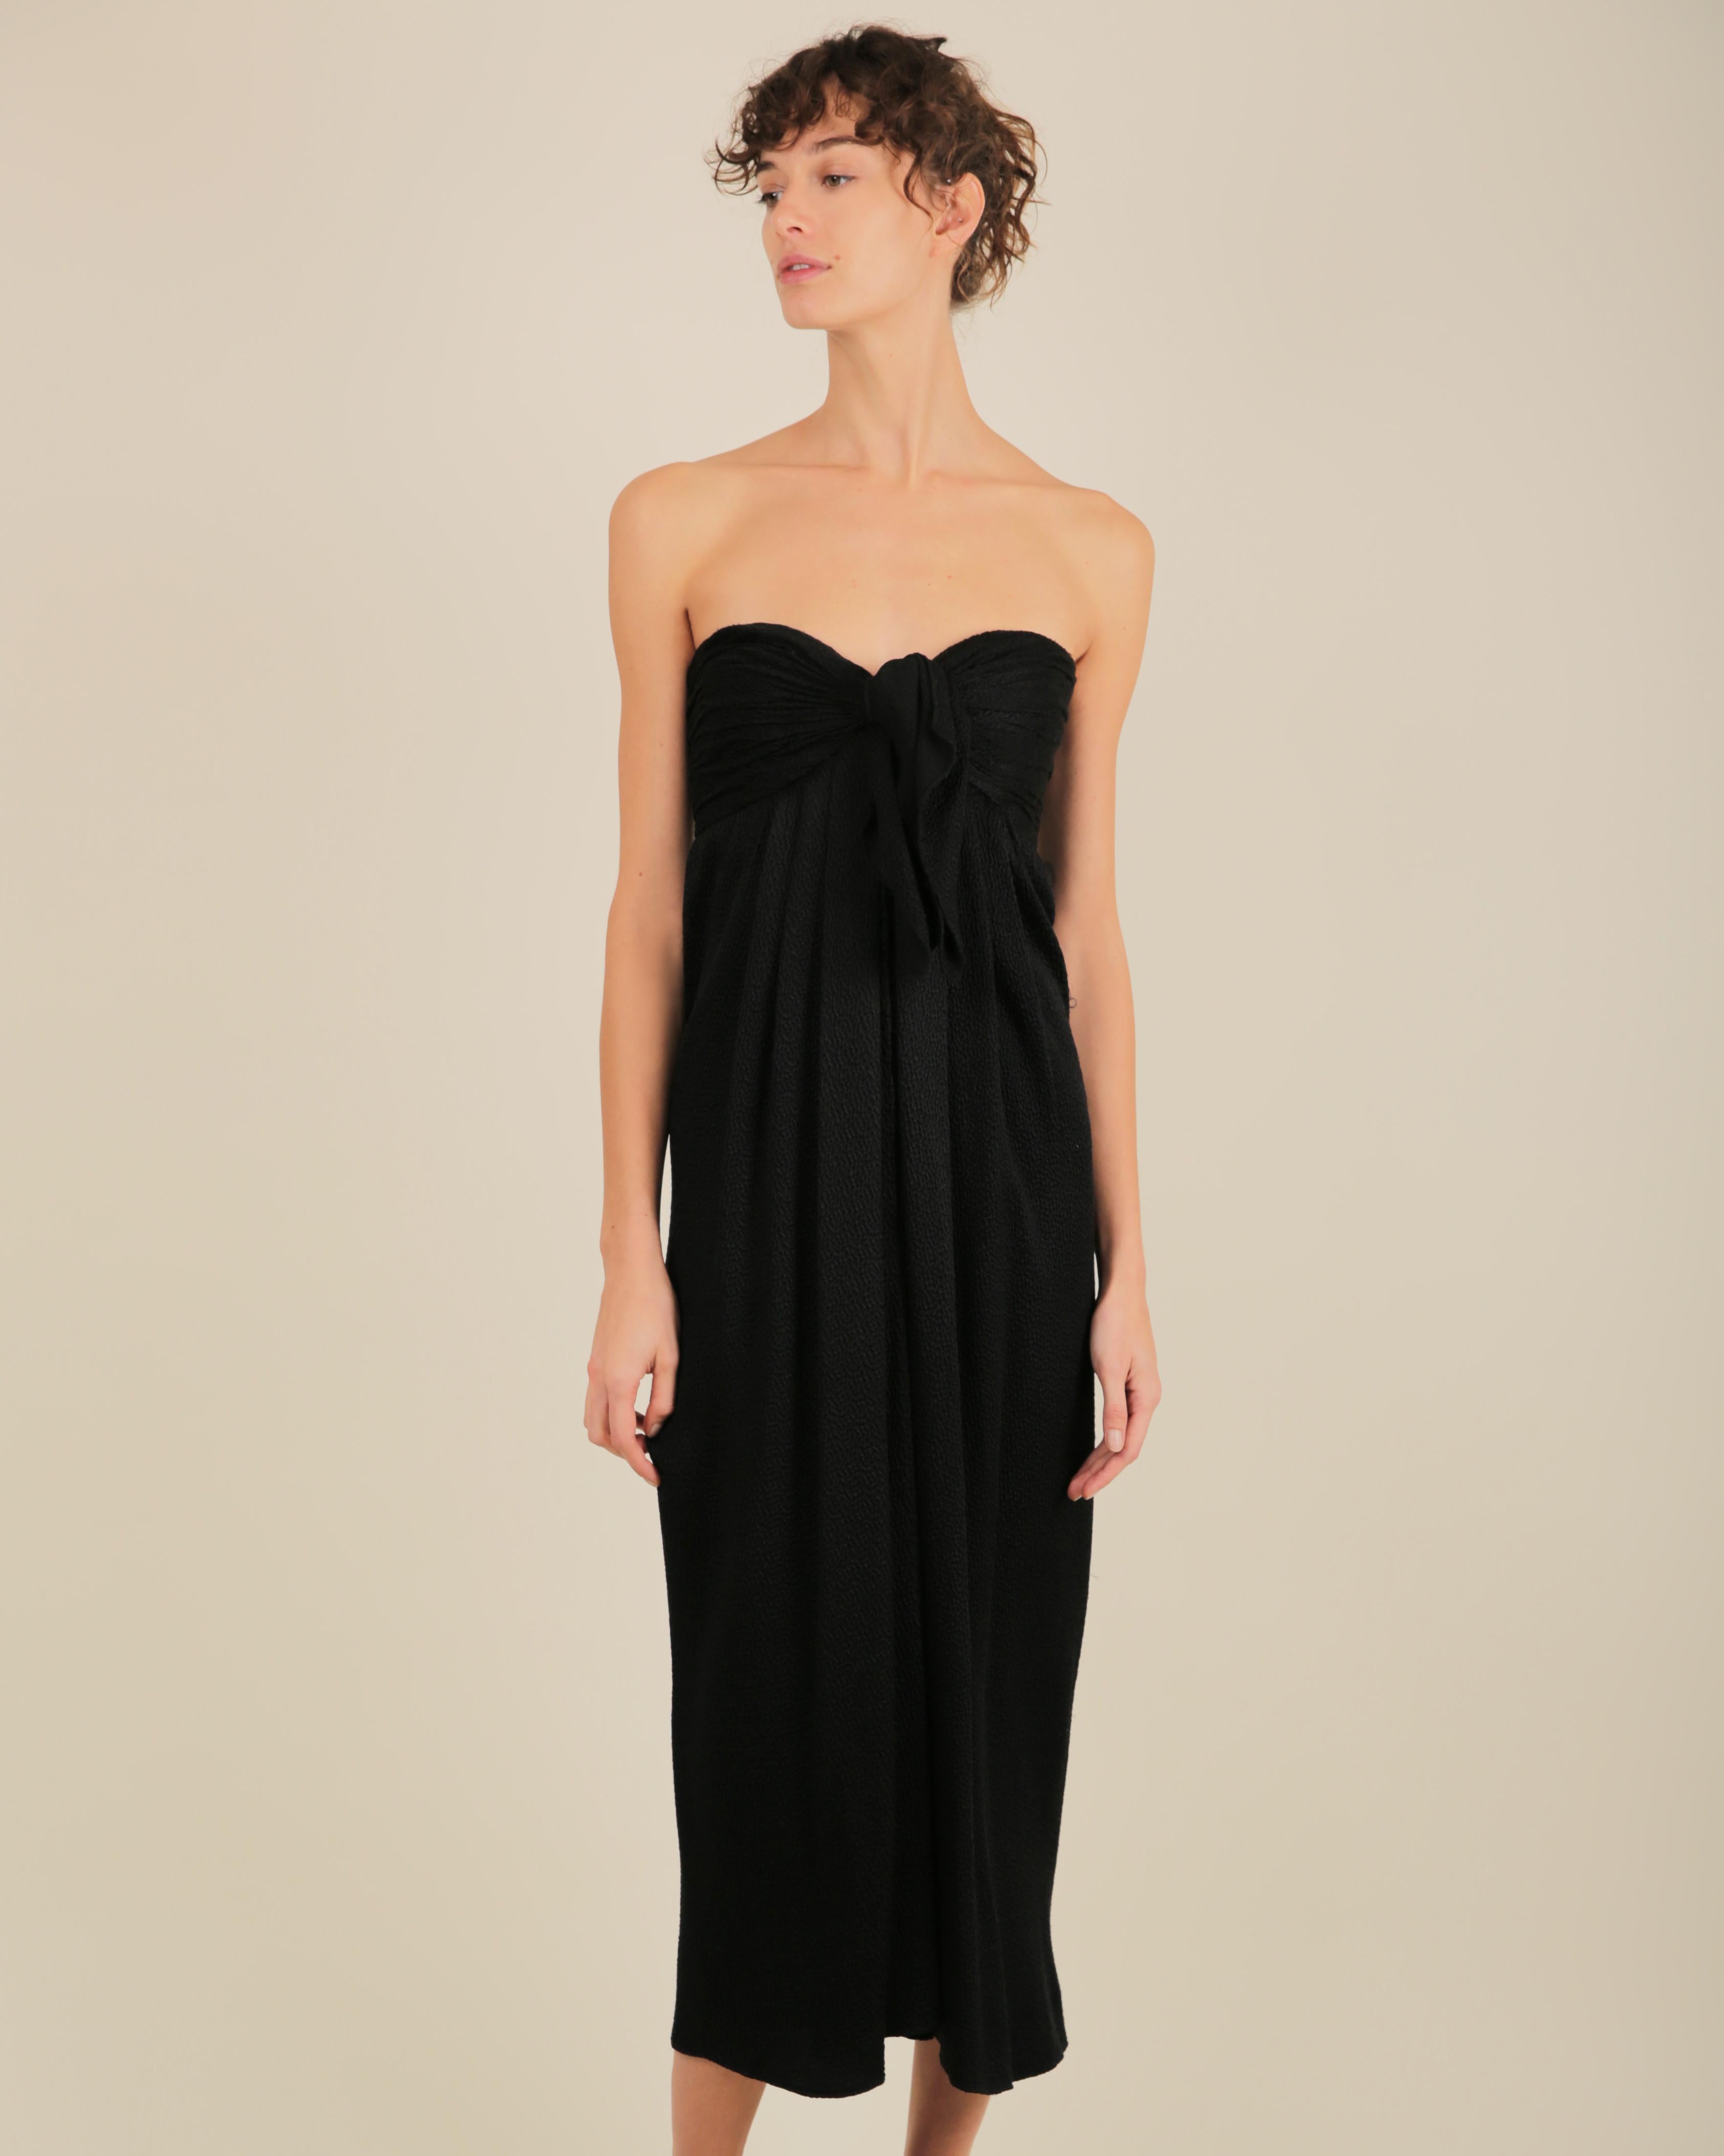 LOVE LALI Vintage

Vintage Oscar de la Renta from 2008
Extremely elegant beautiful black strapless bustier dress with a rolled pleated bust and self tie closure at centre front
Draped body
The fabric has the most beautiful texture, so do zoom in on